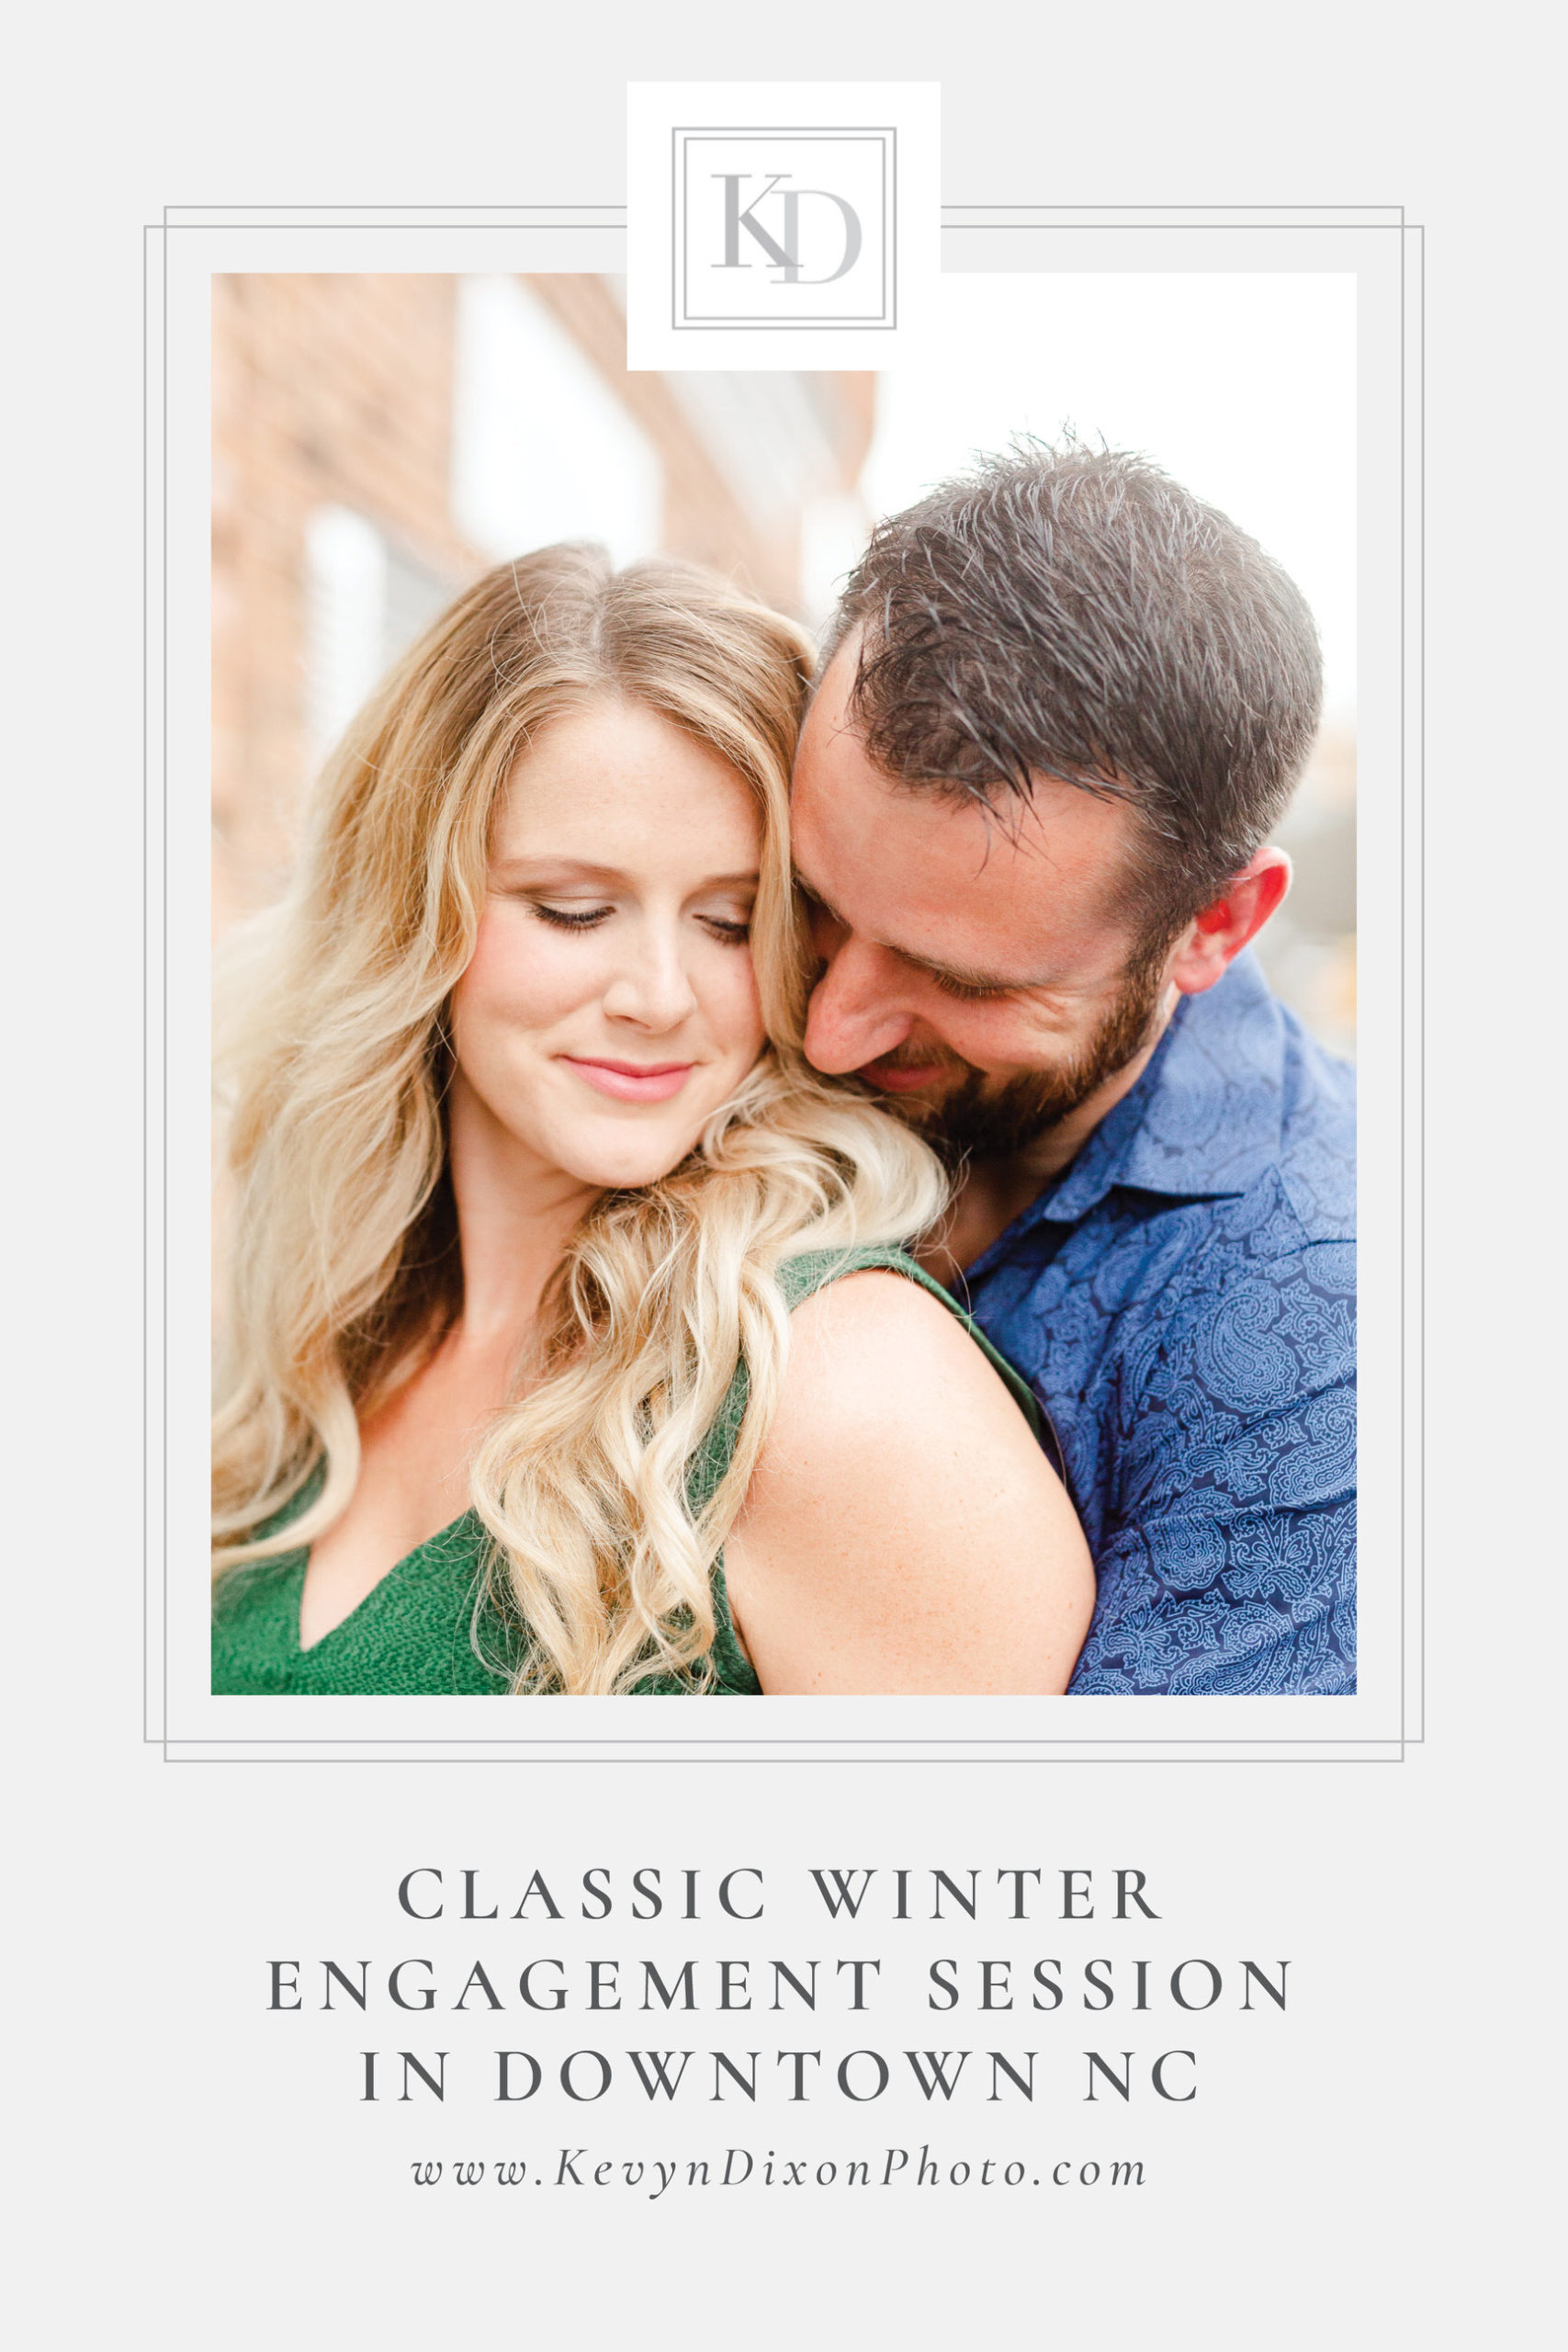 Pin Image for Downtown Waxhaw, NC Engagement Session